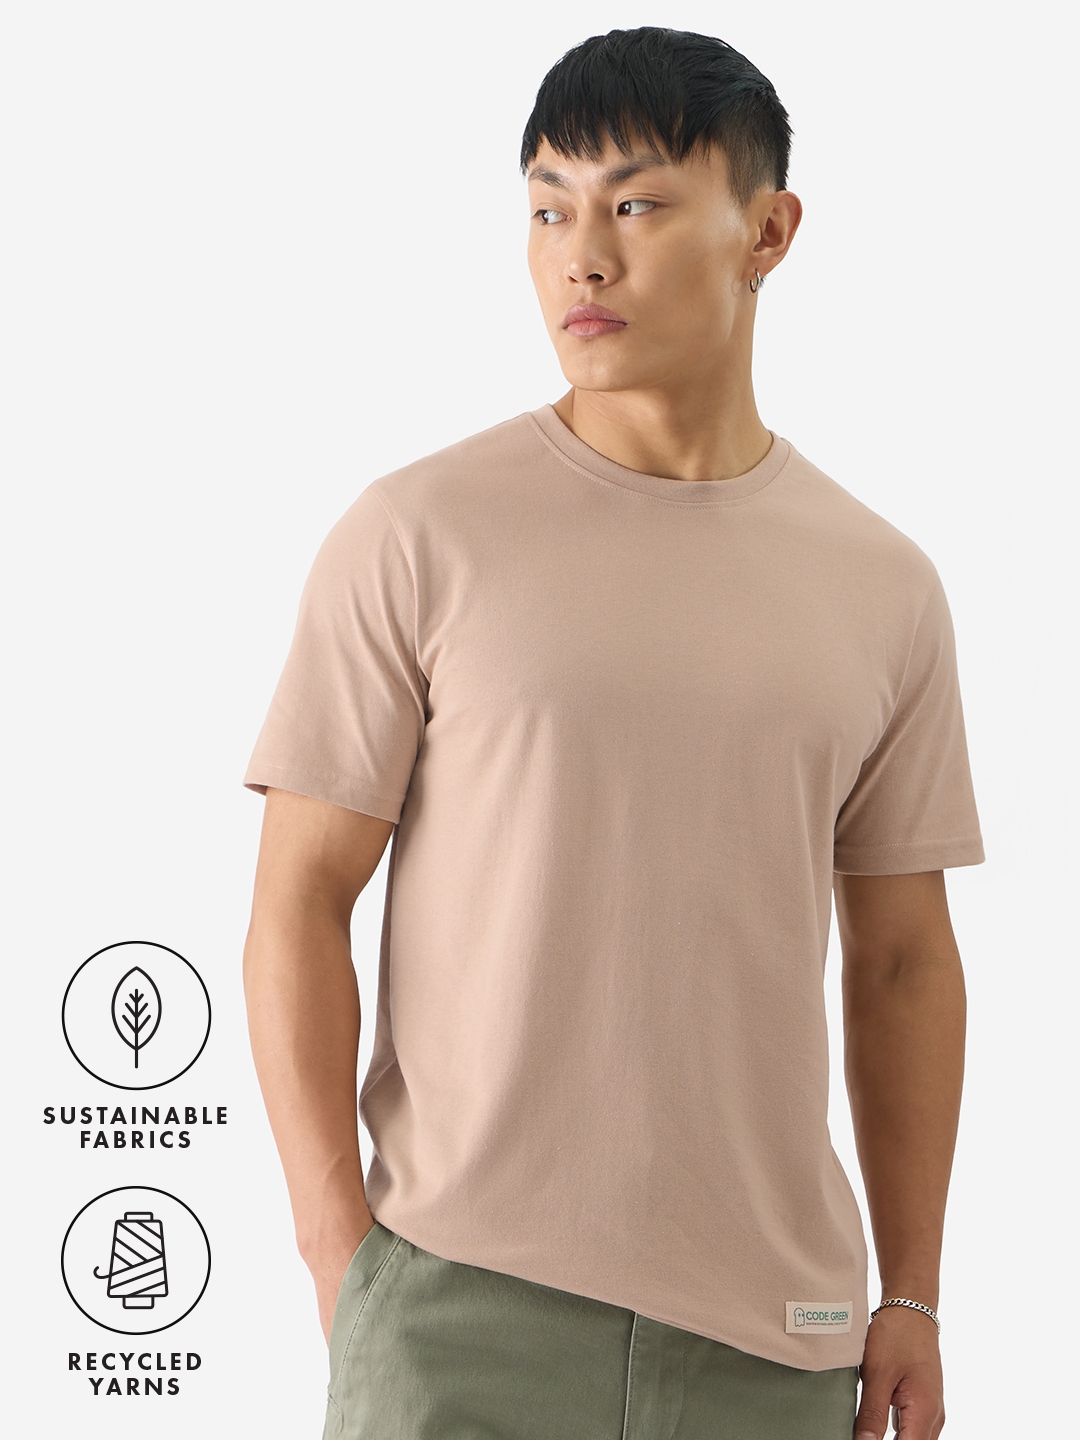 Men's Classic Sustainable Tee: Beige T-Shirts